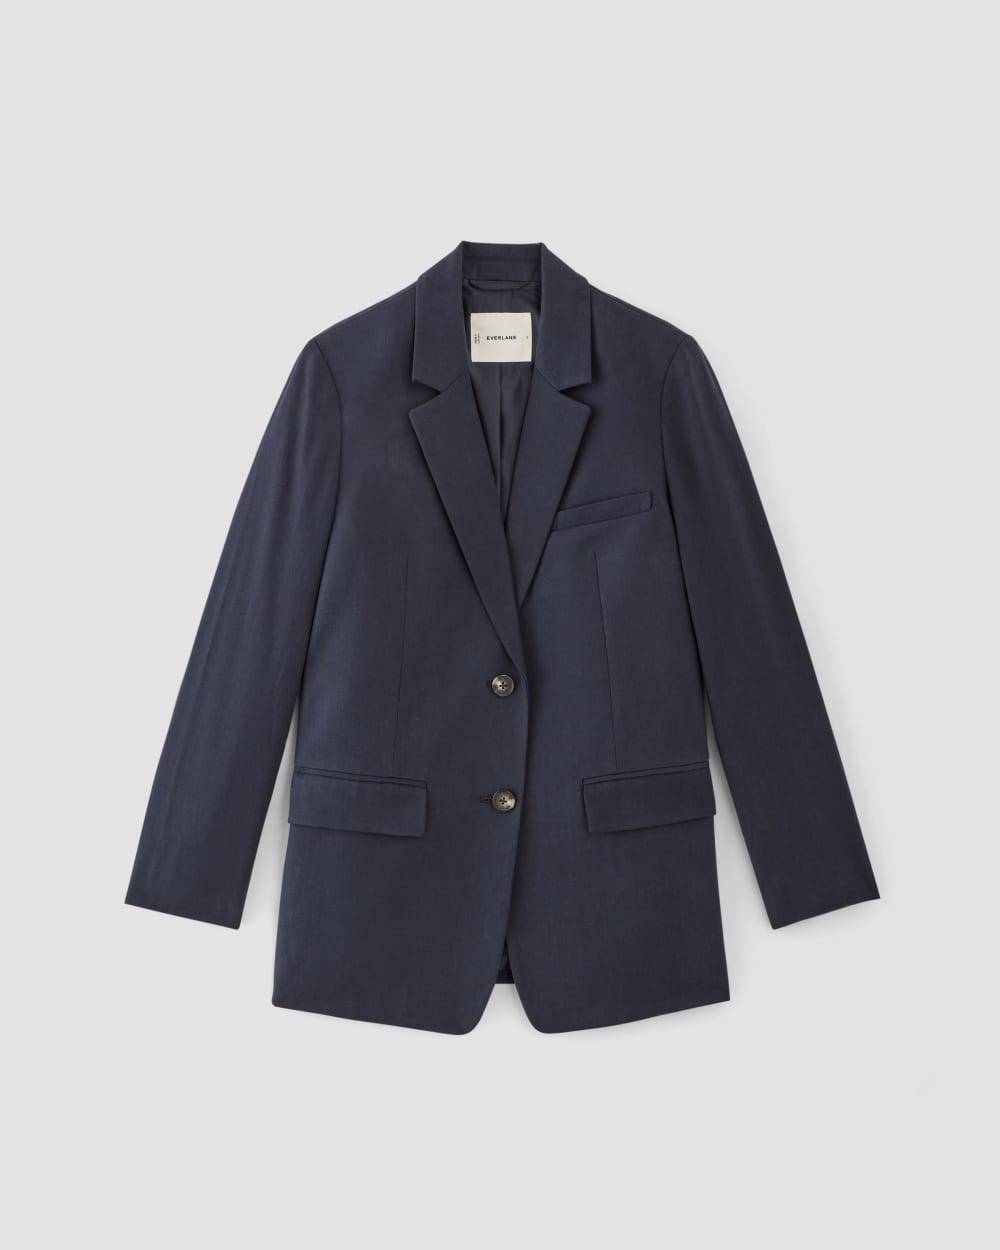 Everlane's Oversized Double Breasted Blazer Review + New Arrivals -  Crystalin Marie